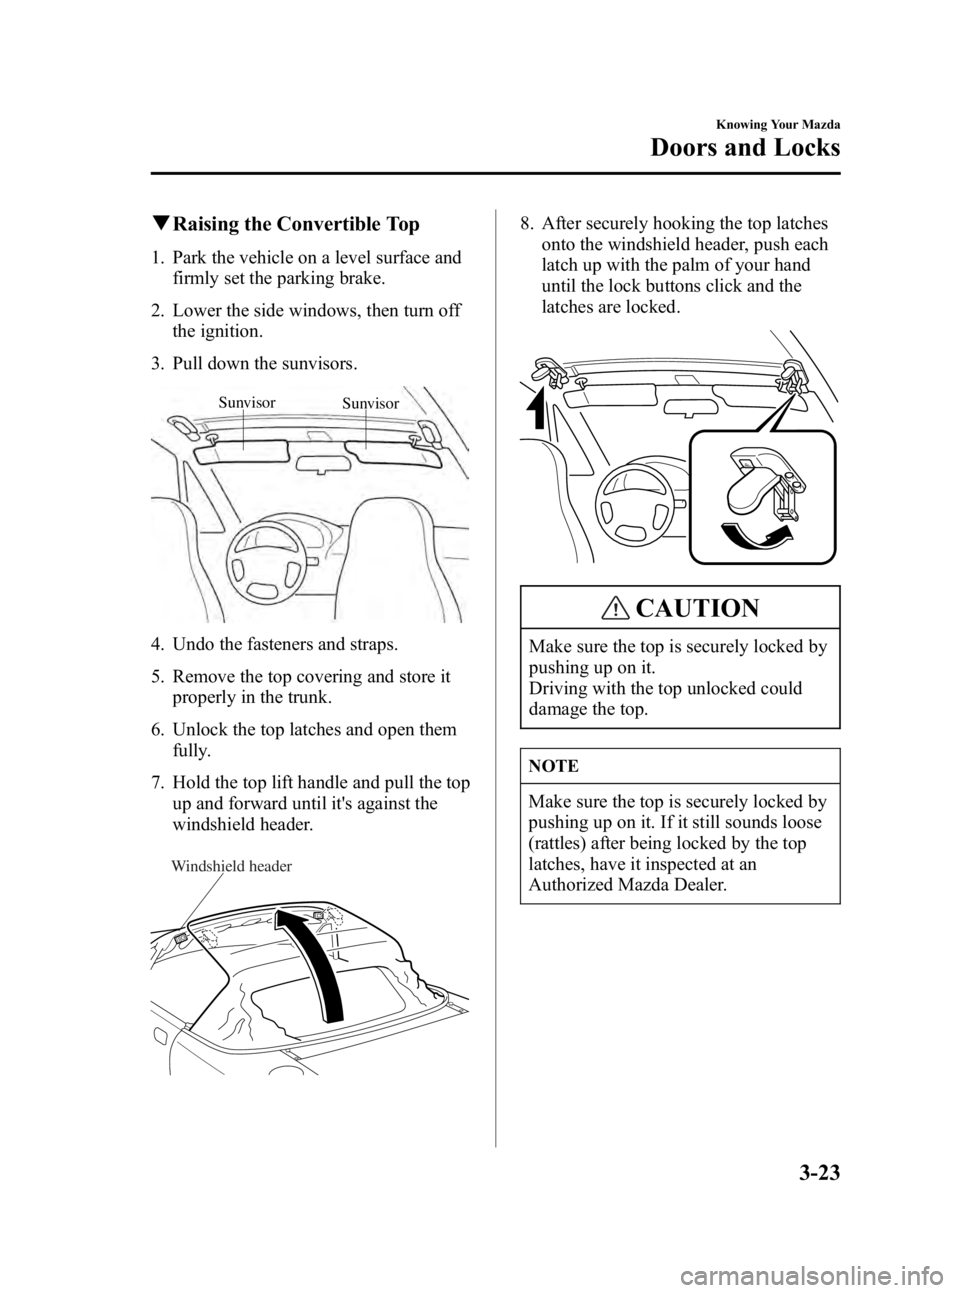 MAZDA MODEL MX-5 MIATA 2005 Repair Manual Black plate (65,1)
qRaising the Convertible Top
1. Park the vehicle on a level surface and
firmly set the parking brake.
2. Lower the side windows, then turn off the ignition.
3. Pull down the sunviso